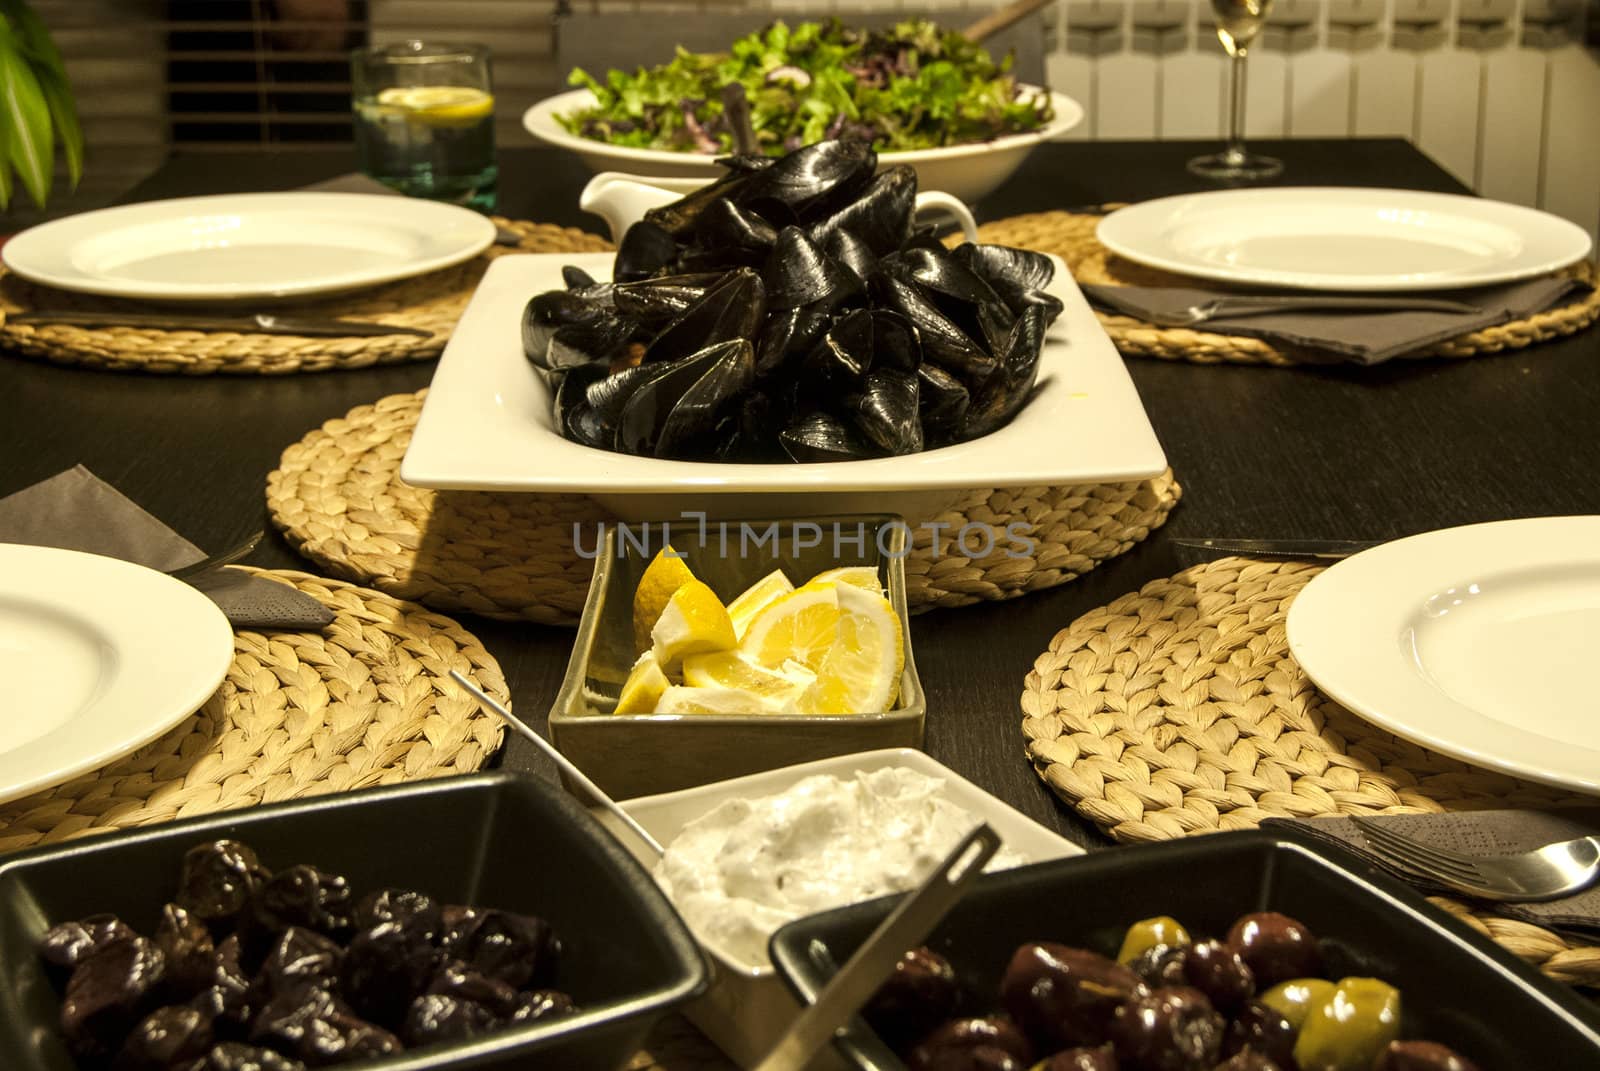 Dishes with mussels,olives,caviar by varbenov